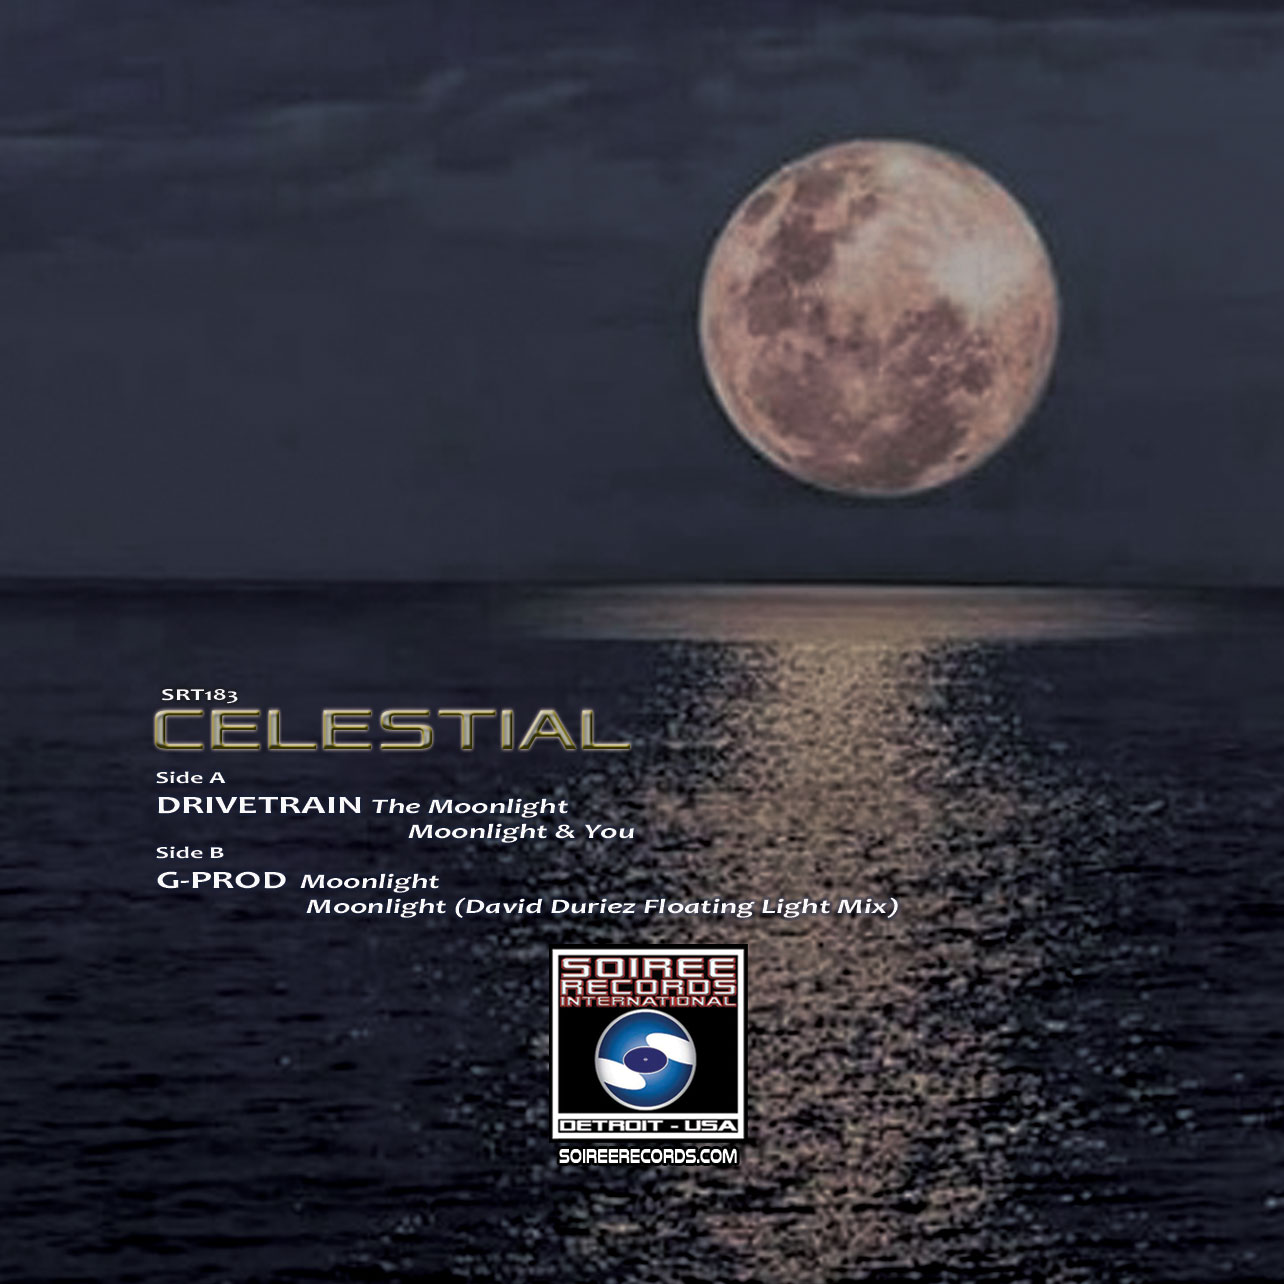 “Celestial” compilation by Soiree Records International – A Nocturnal Sonic Journey